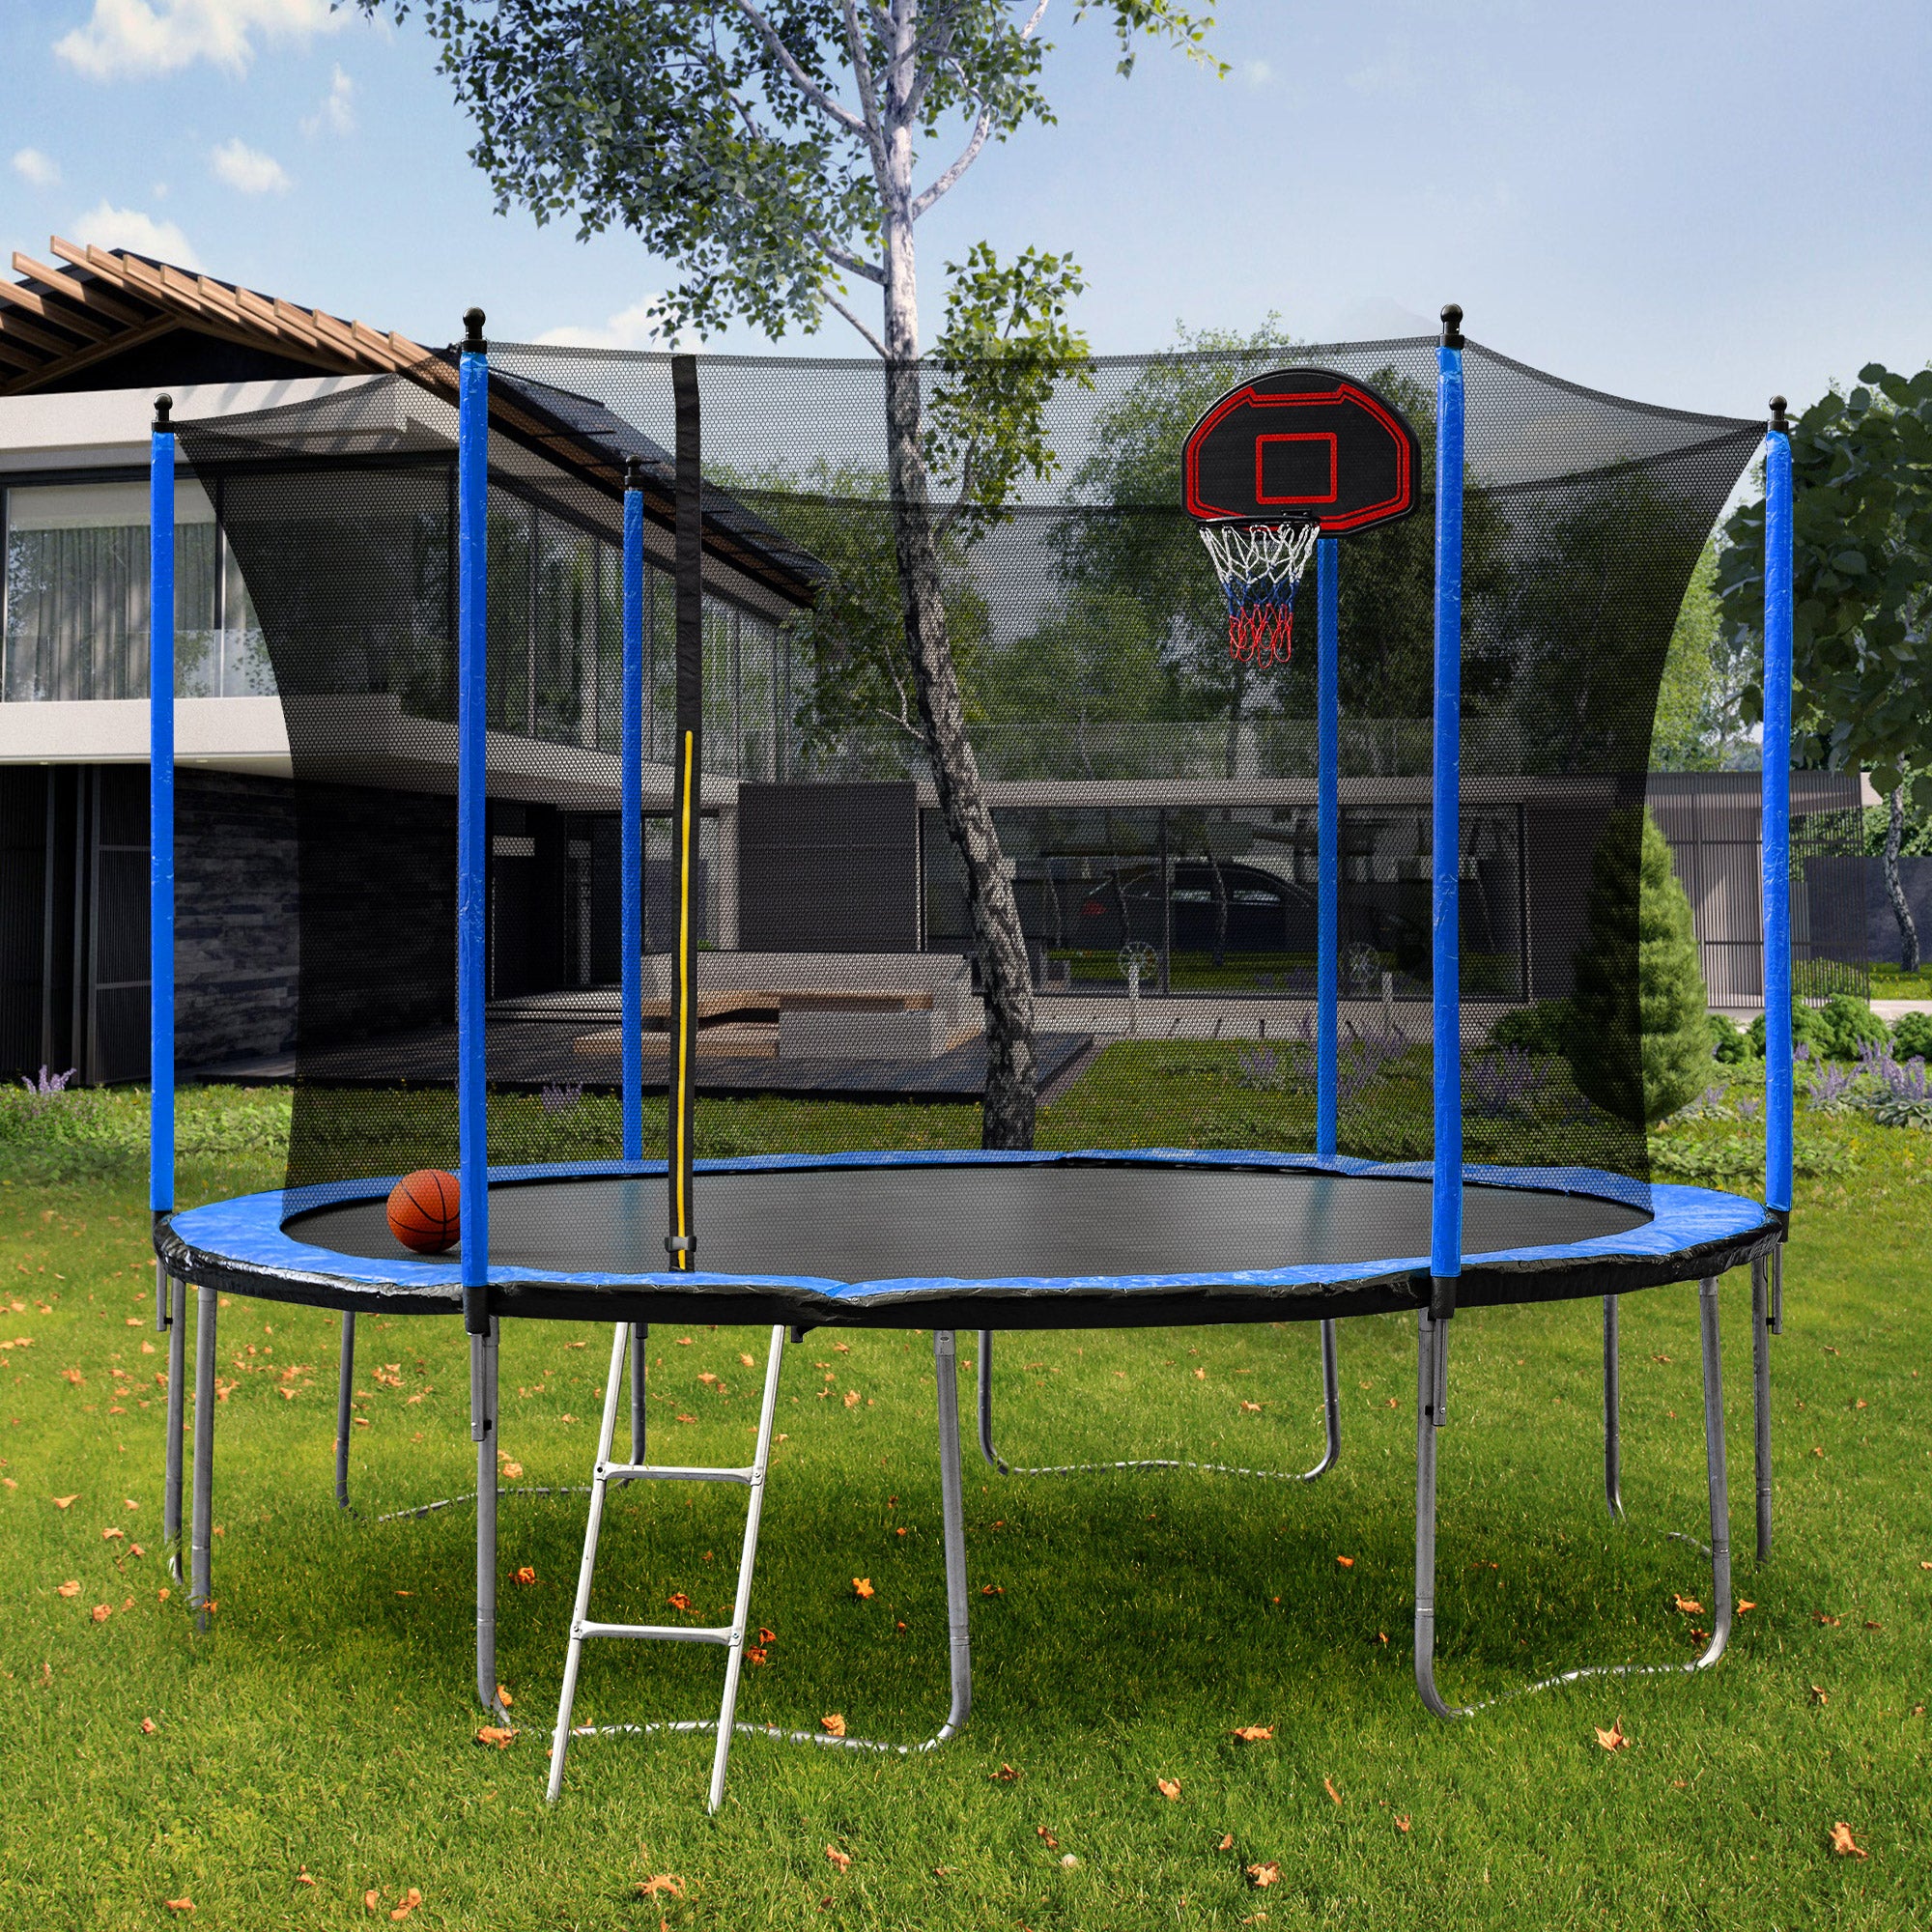 15FT Trampoline with Basketball Hoop Inflator and blue-stainless steel